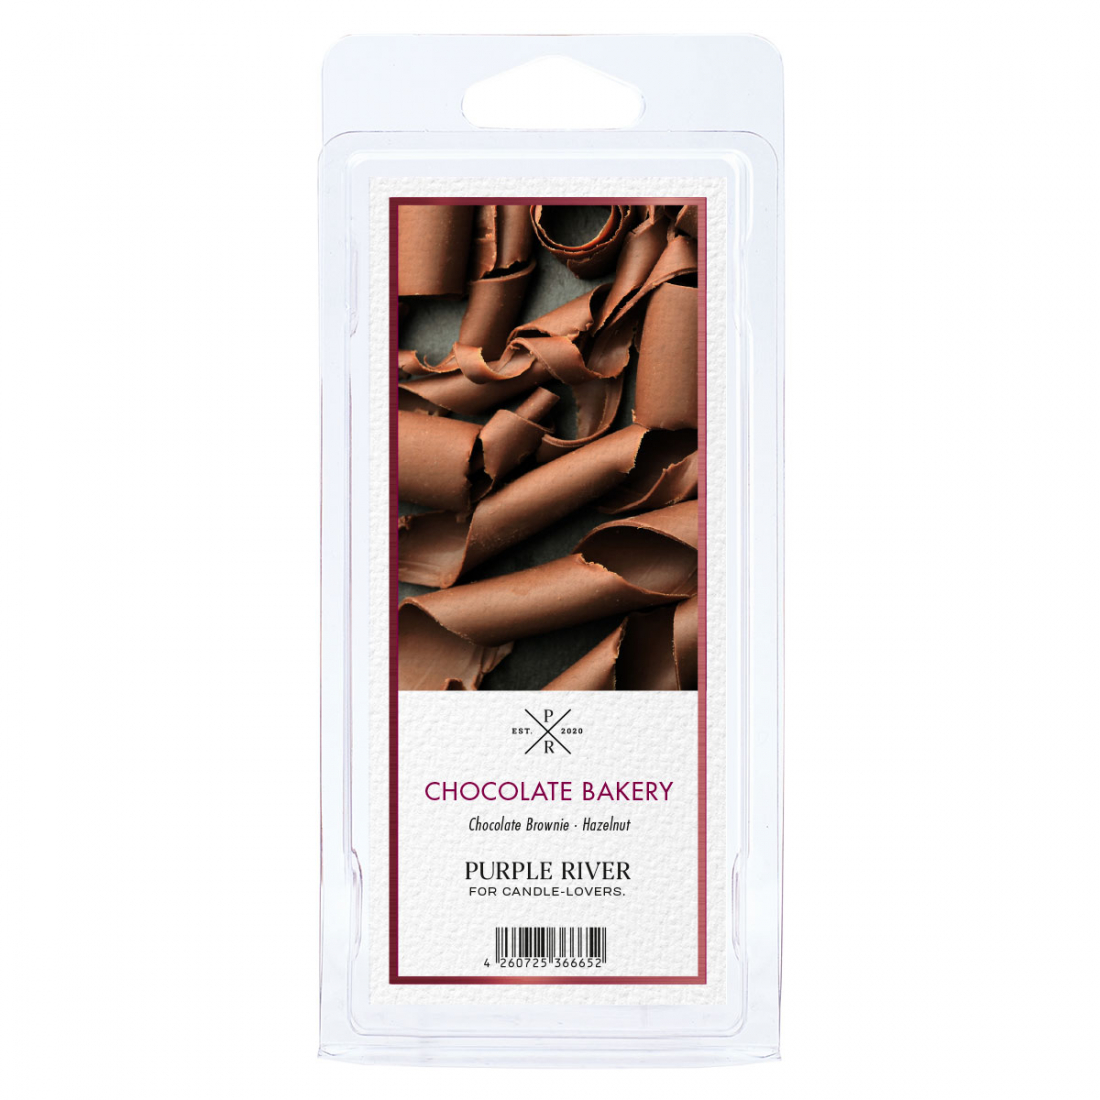 'Chocolate Bakery' Scented Wax - 50 g